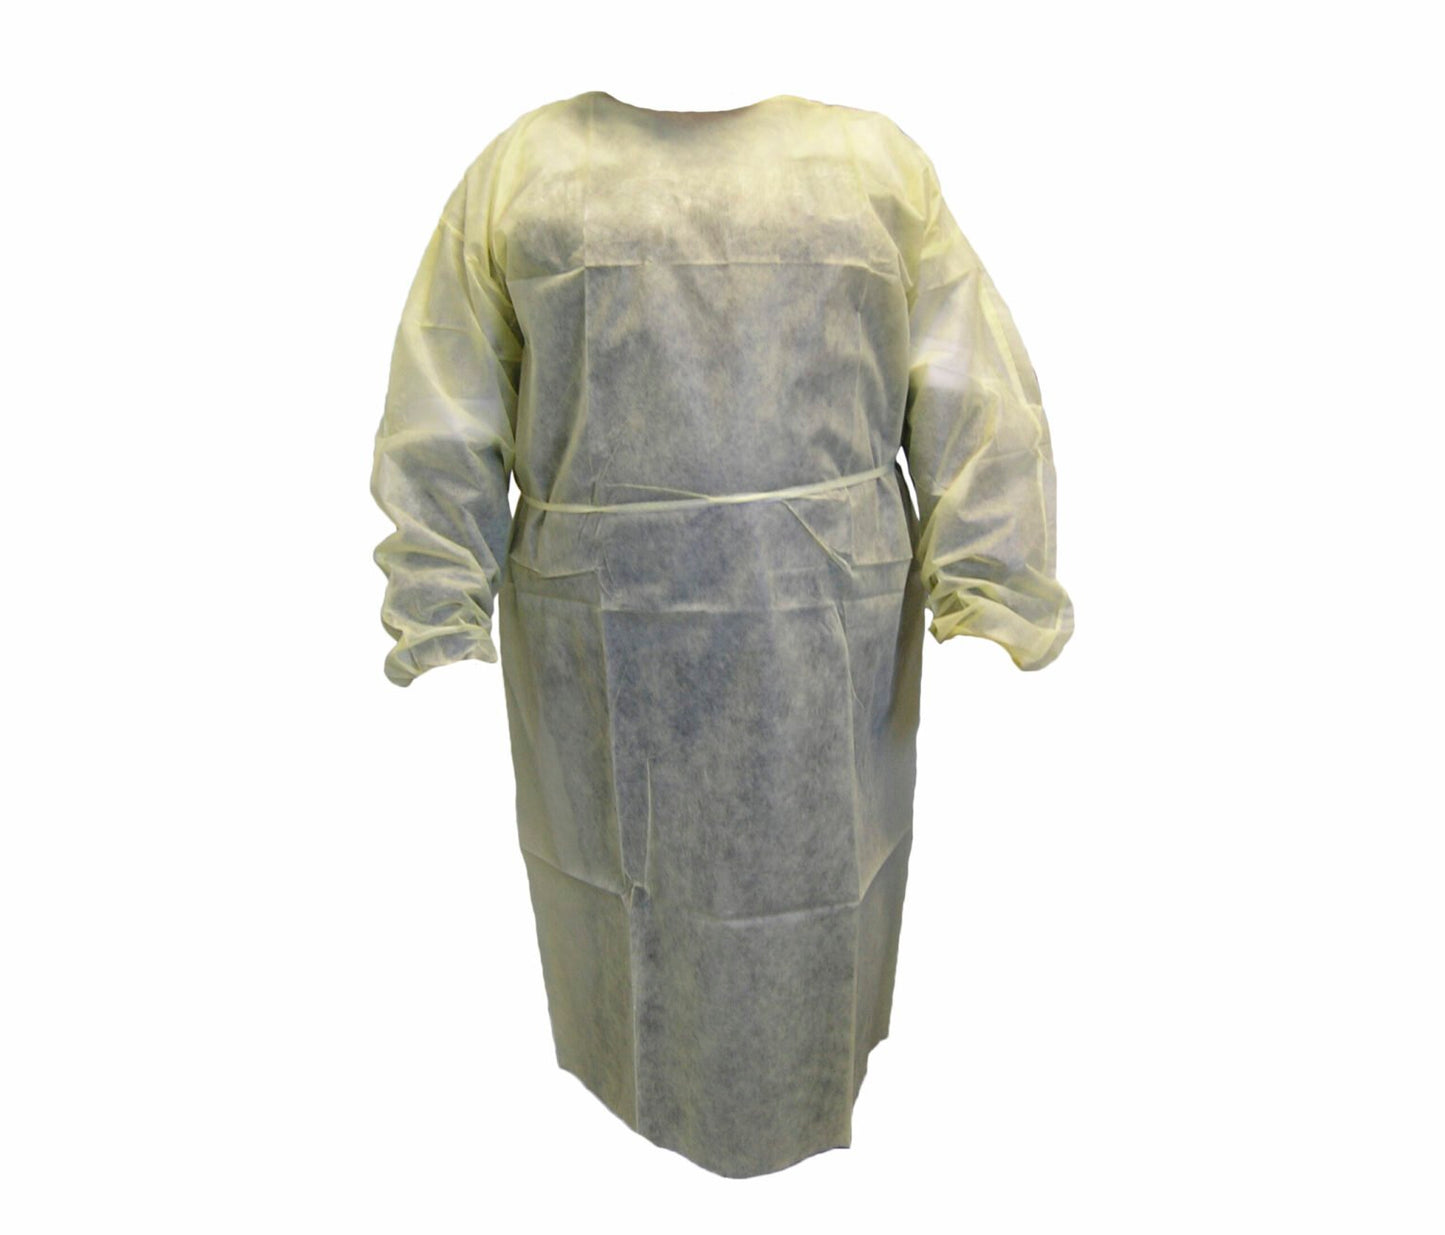 POLYPROPYLENE ISOLATION GOWN - New England Safety Supply